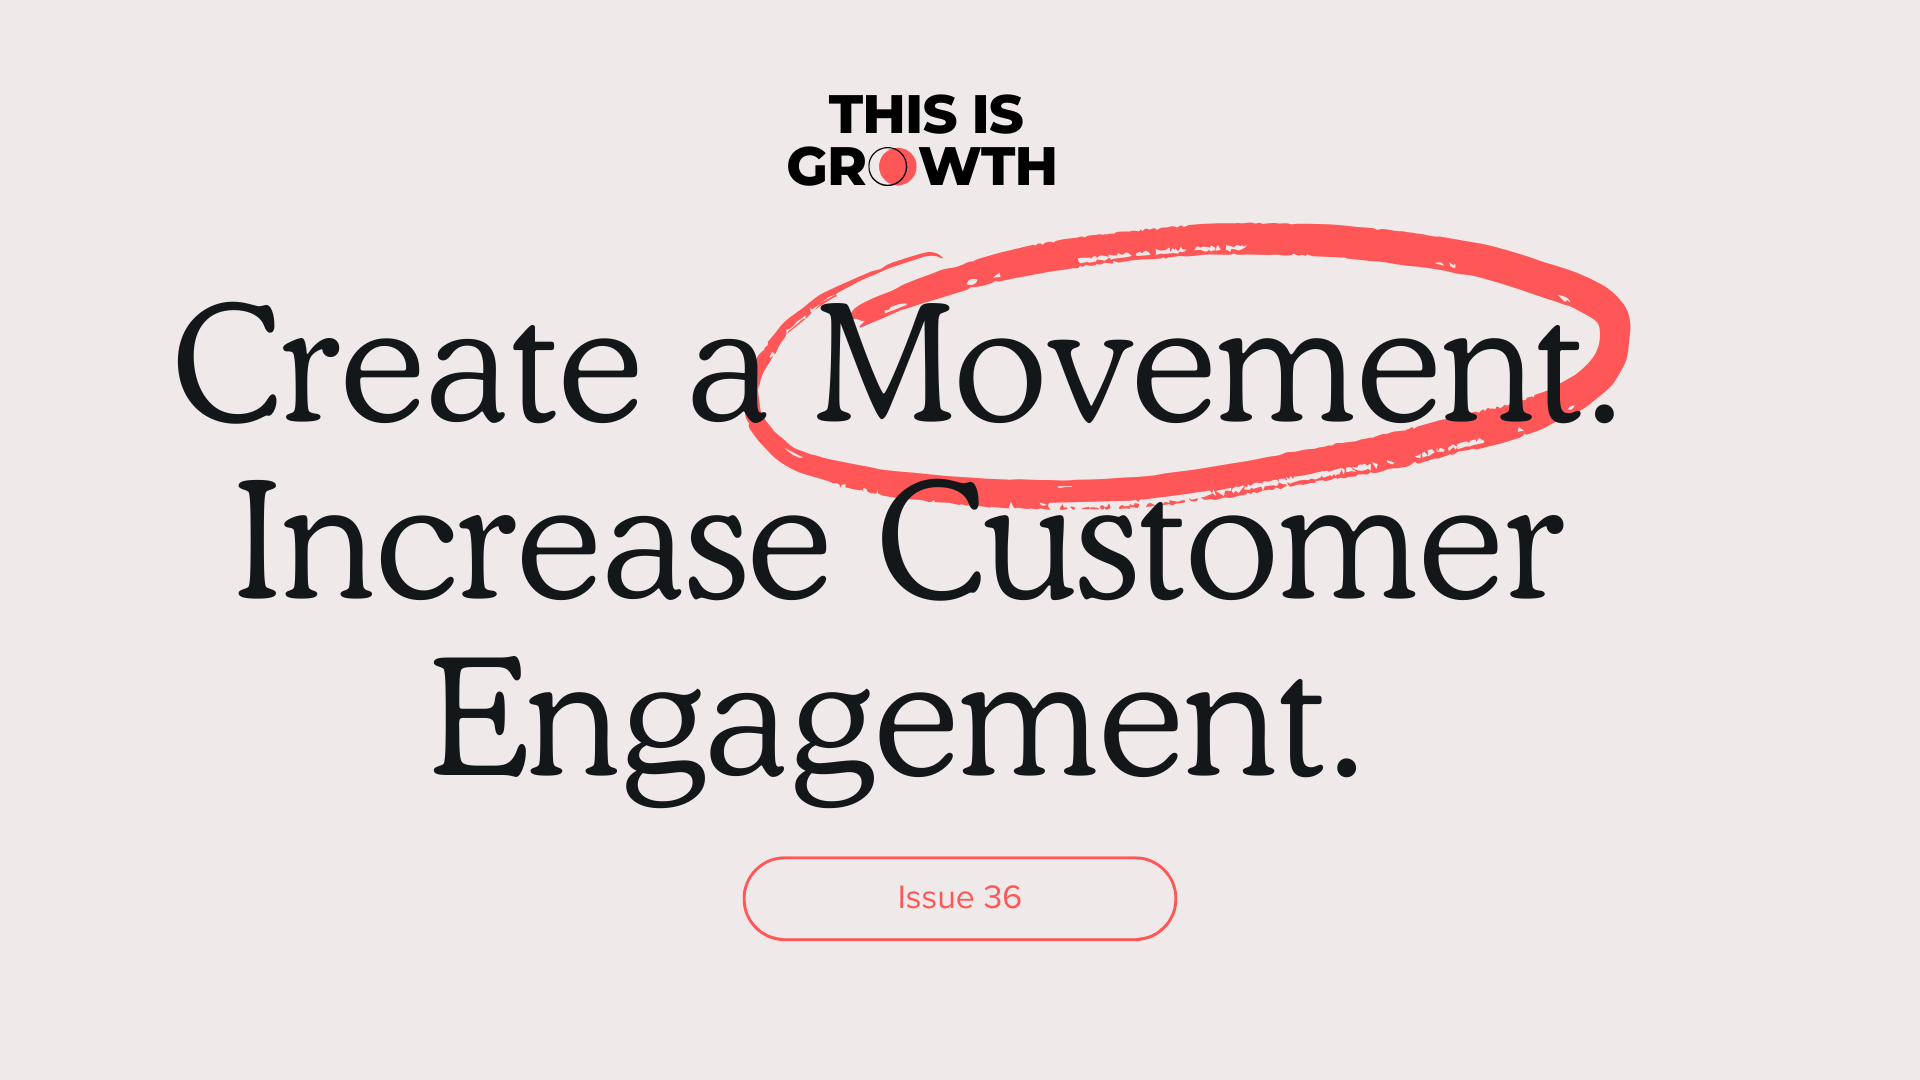 Create a Movement. Increase Customer Engagement.